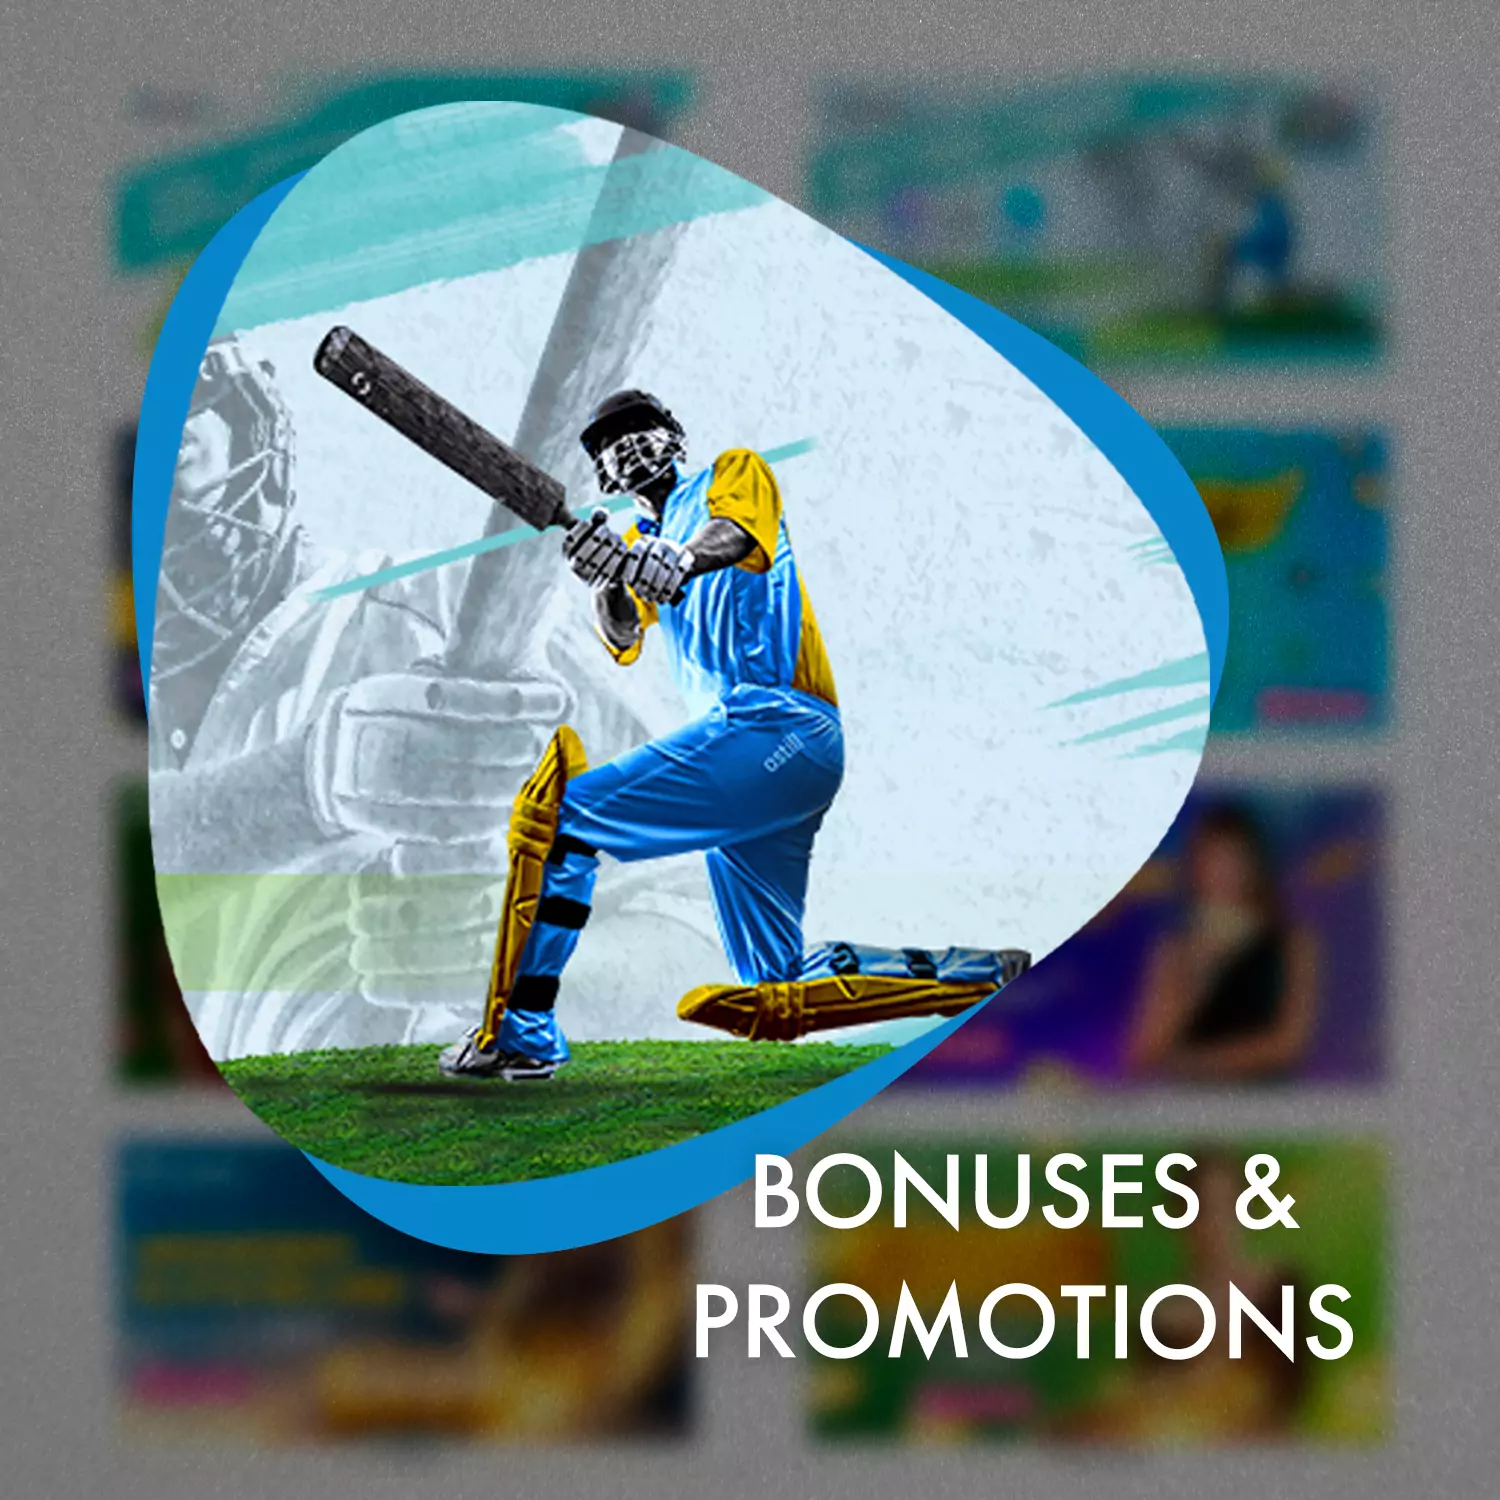 In addition to offers on the first deposit, there are many other bonuses and promotions on the site.